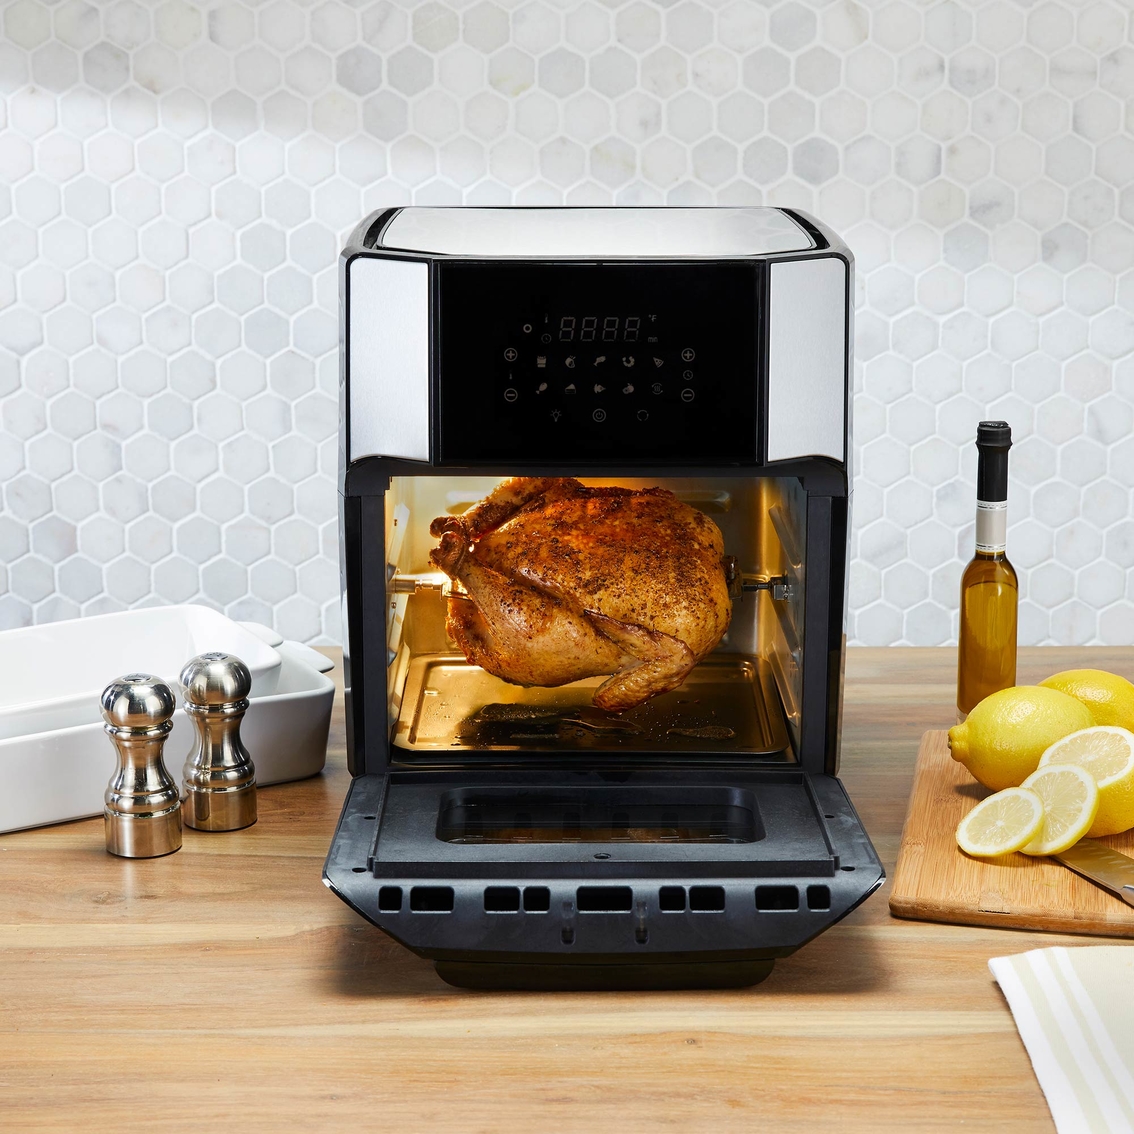 WestBend 12 qt. Air Fryer Oven - Image 8 of 10